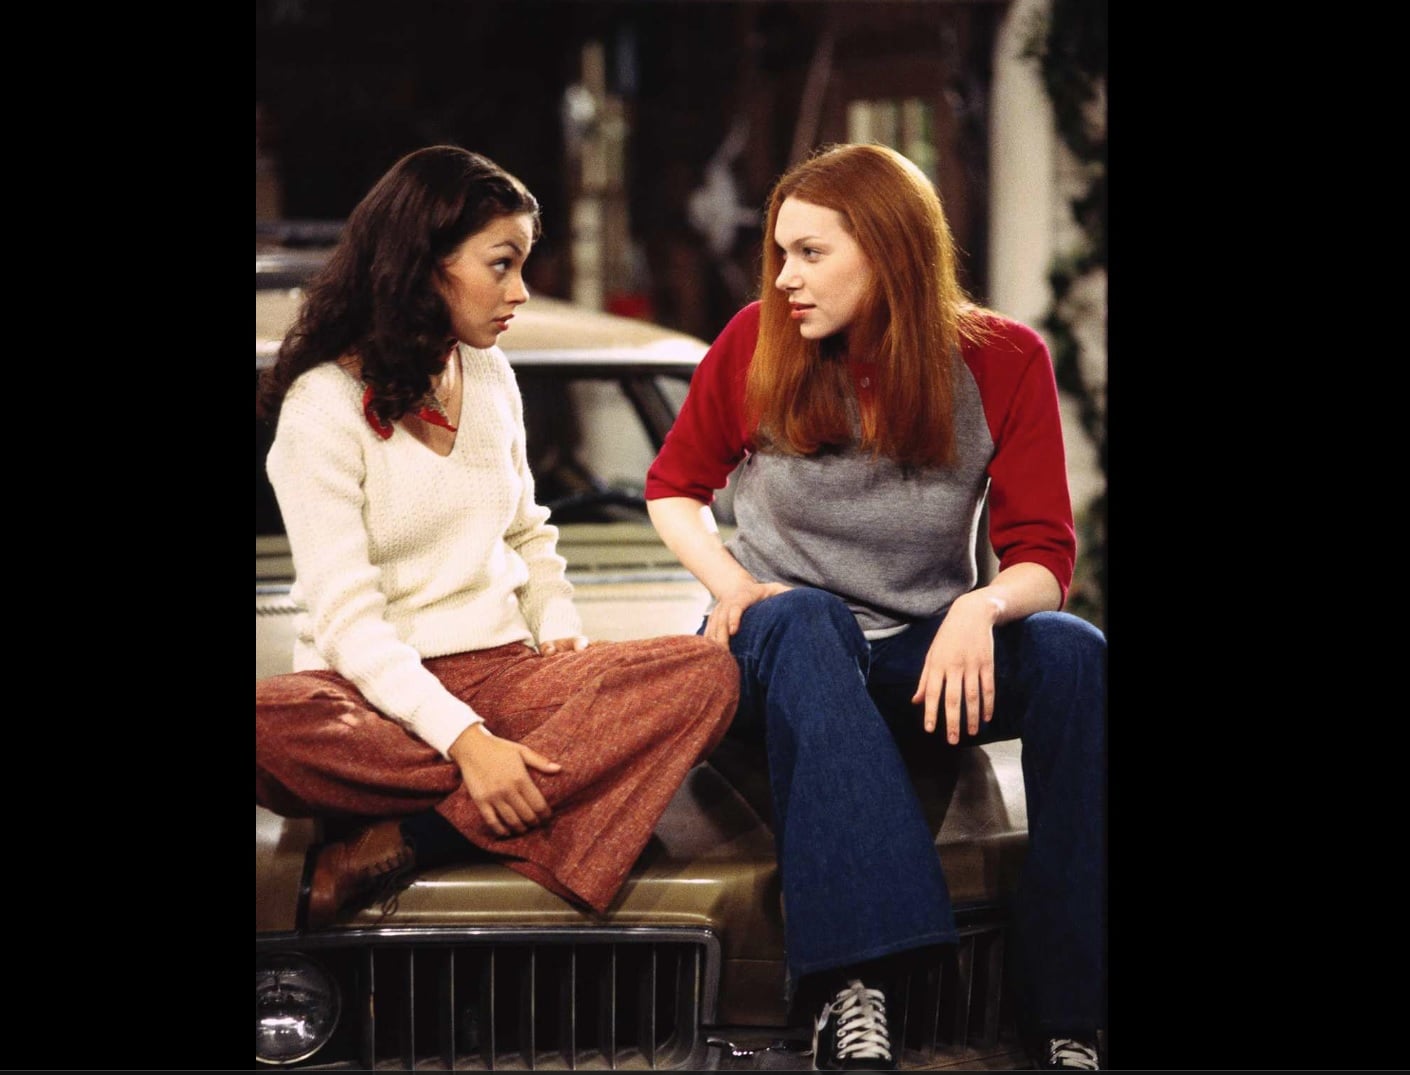 Mila Kunis and Laura Prepon in That '70s Show (1998)